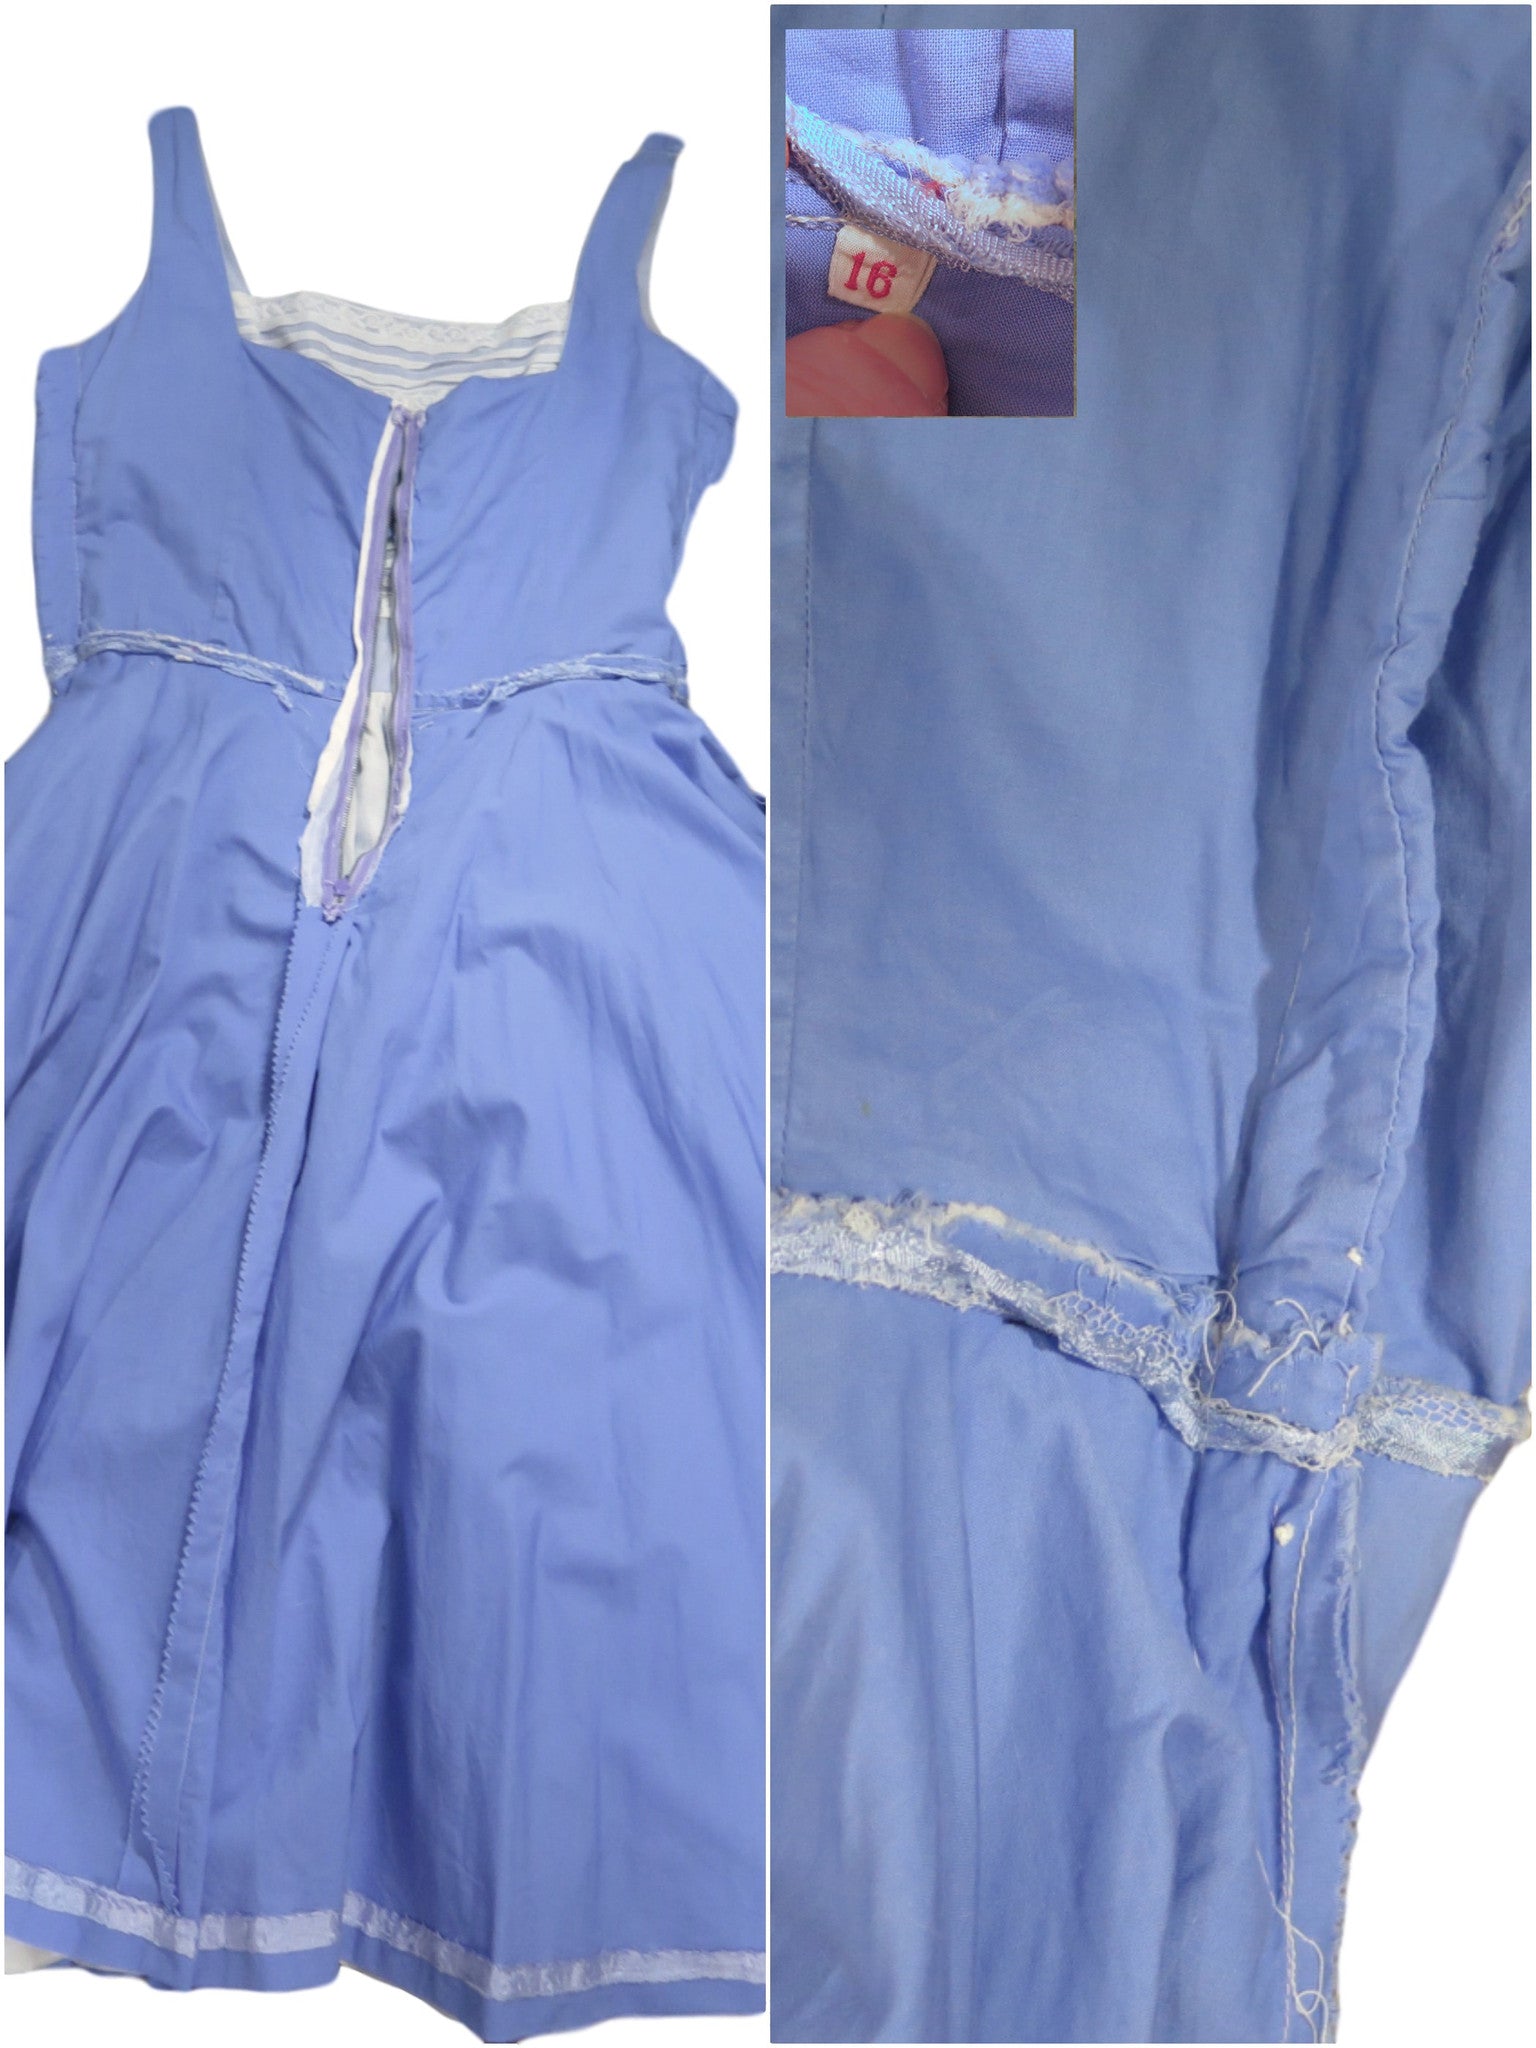 50s White Organdy Over Periwinkle Blue Party Dress Sundress - sm, med